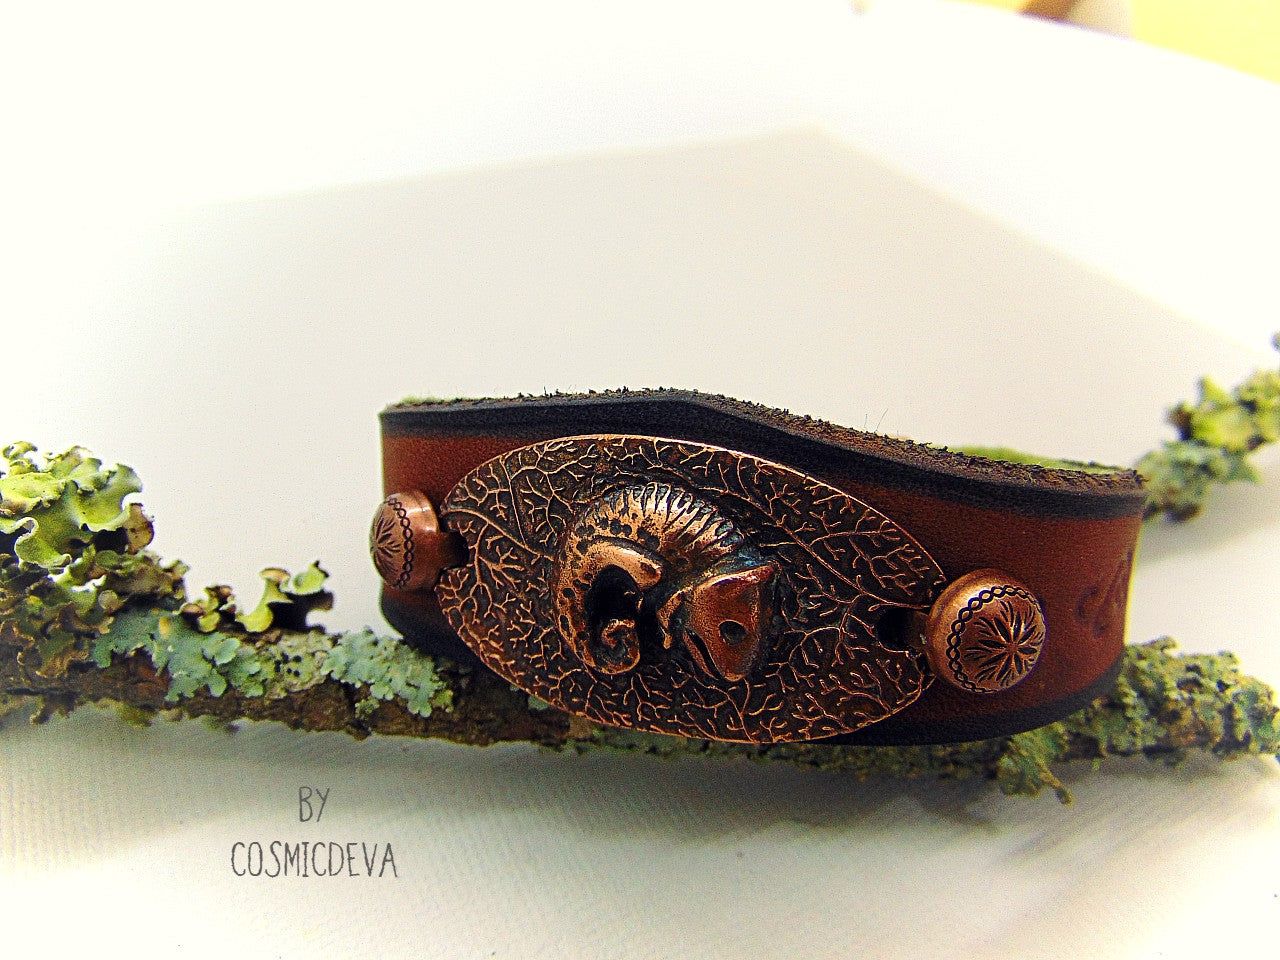 Unique handcrafted leather bracelet made of earthy brown dyed veg tan leather. The focal point is a hand sculptured solid copper chameleon on a textured solid copper base. The inside of the leather bracelet is lined with olive green felt for your comfort.